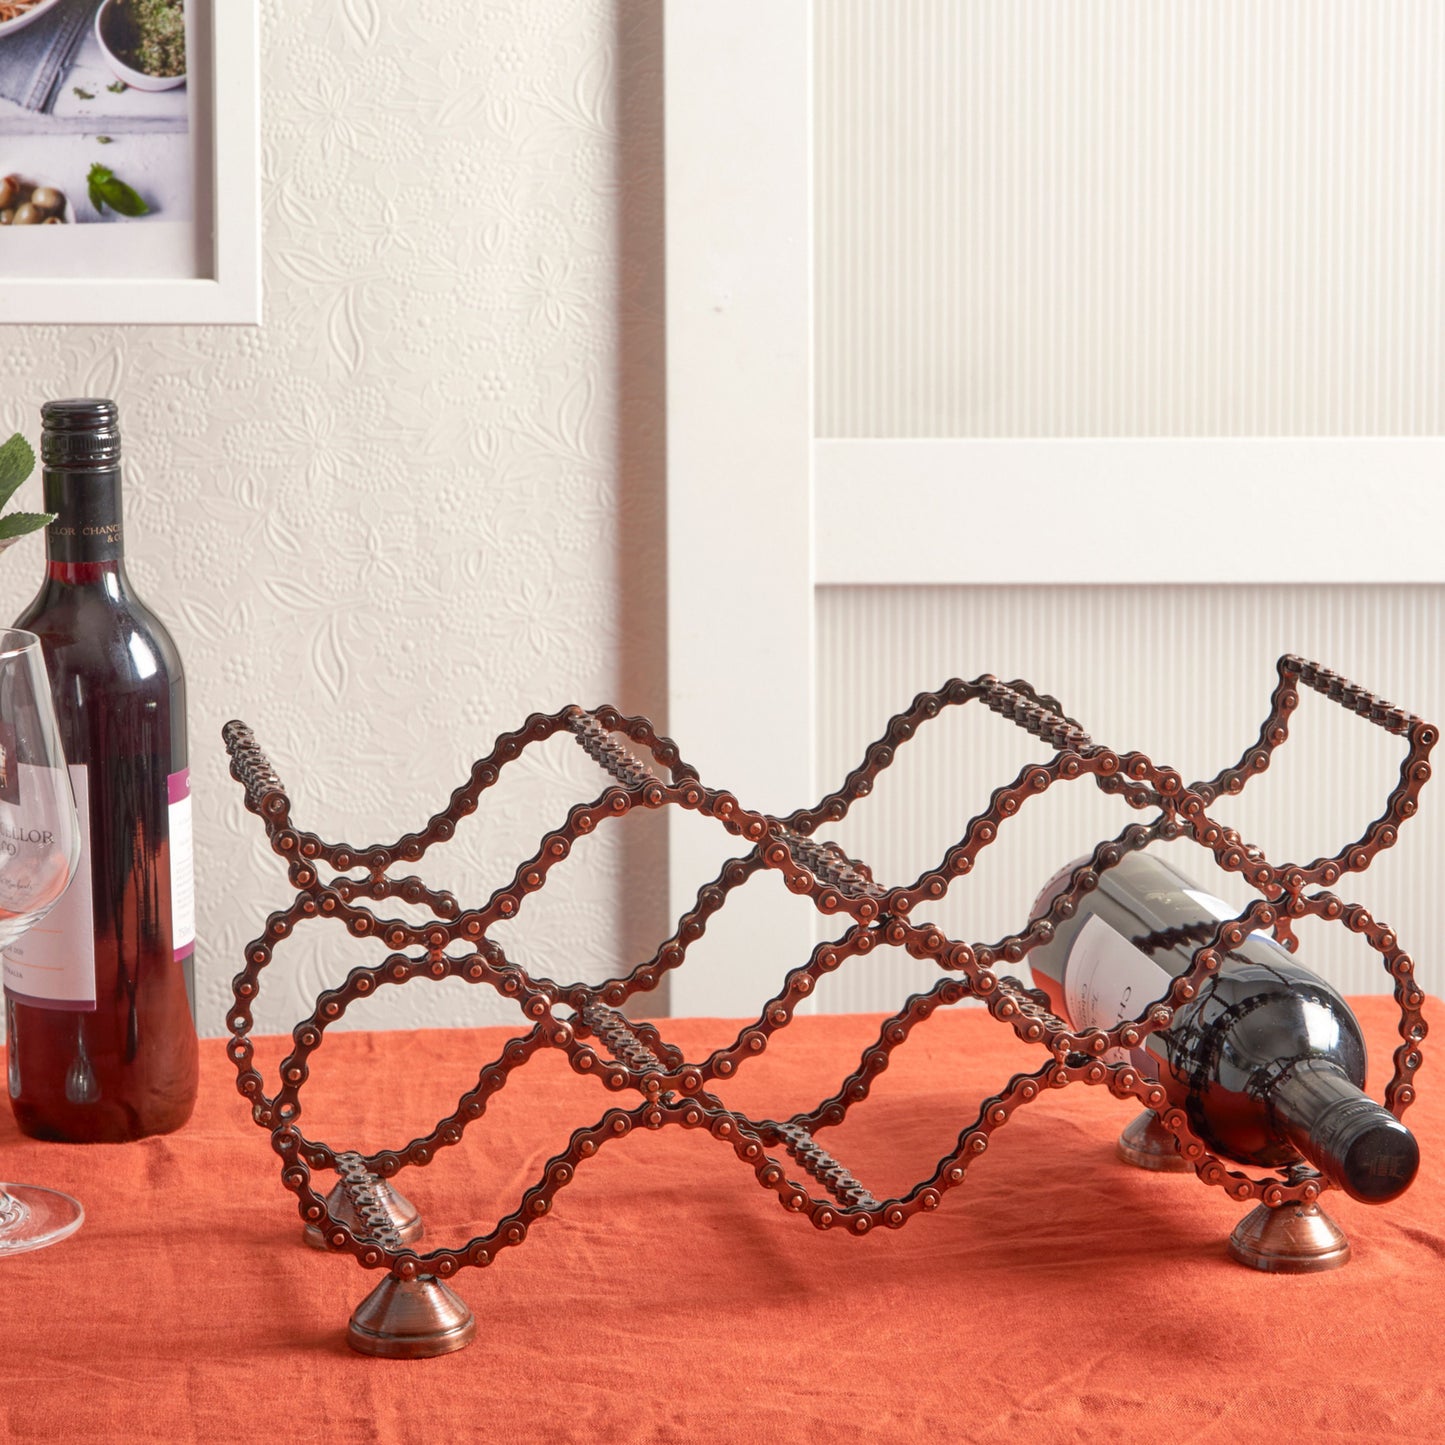 Upcycled Bicycle Chain 8 Wine Bottle Rack Rustic Holder - Handmade - Aksa Home Decor 